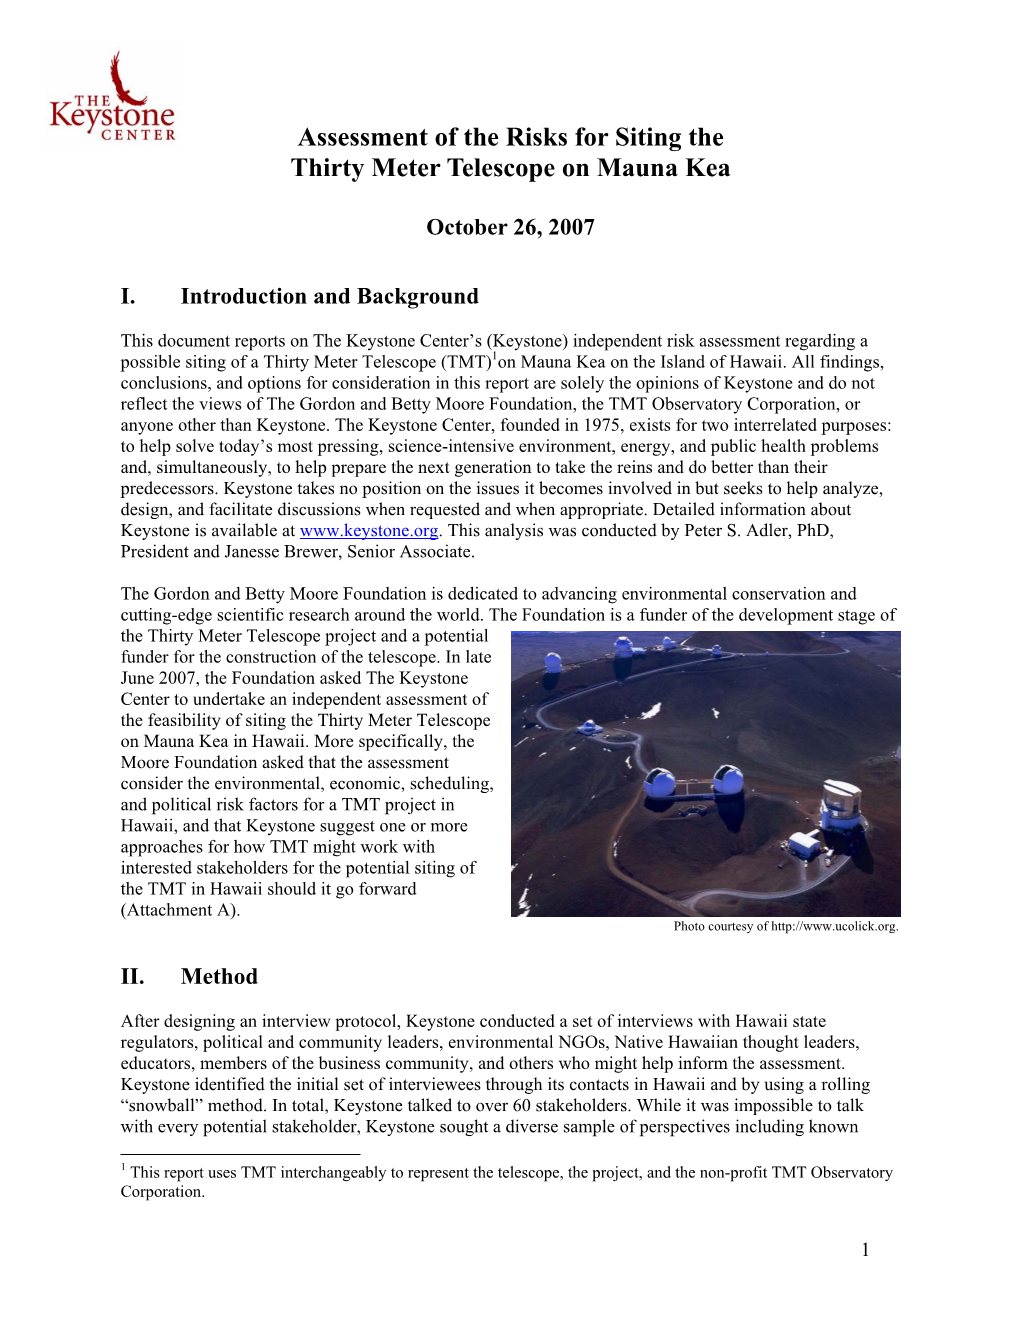 Assessment of the Risks for Siting the Thirty Meter Telescope on Mauna Kea